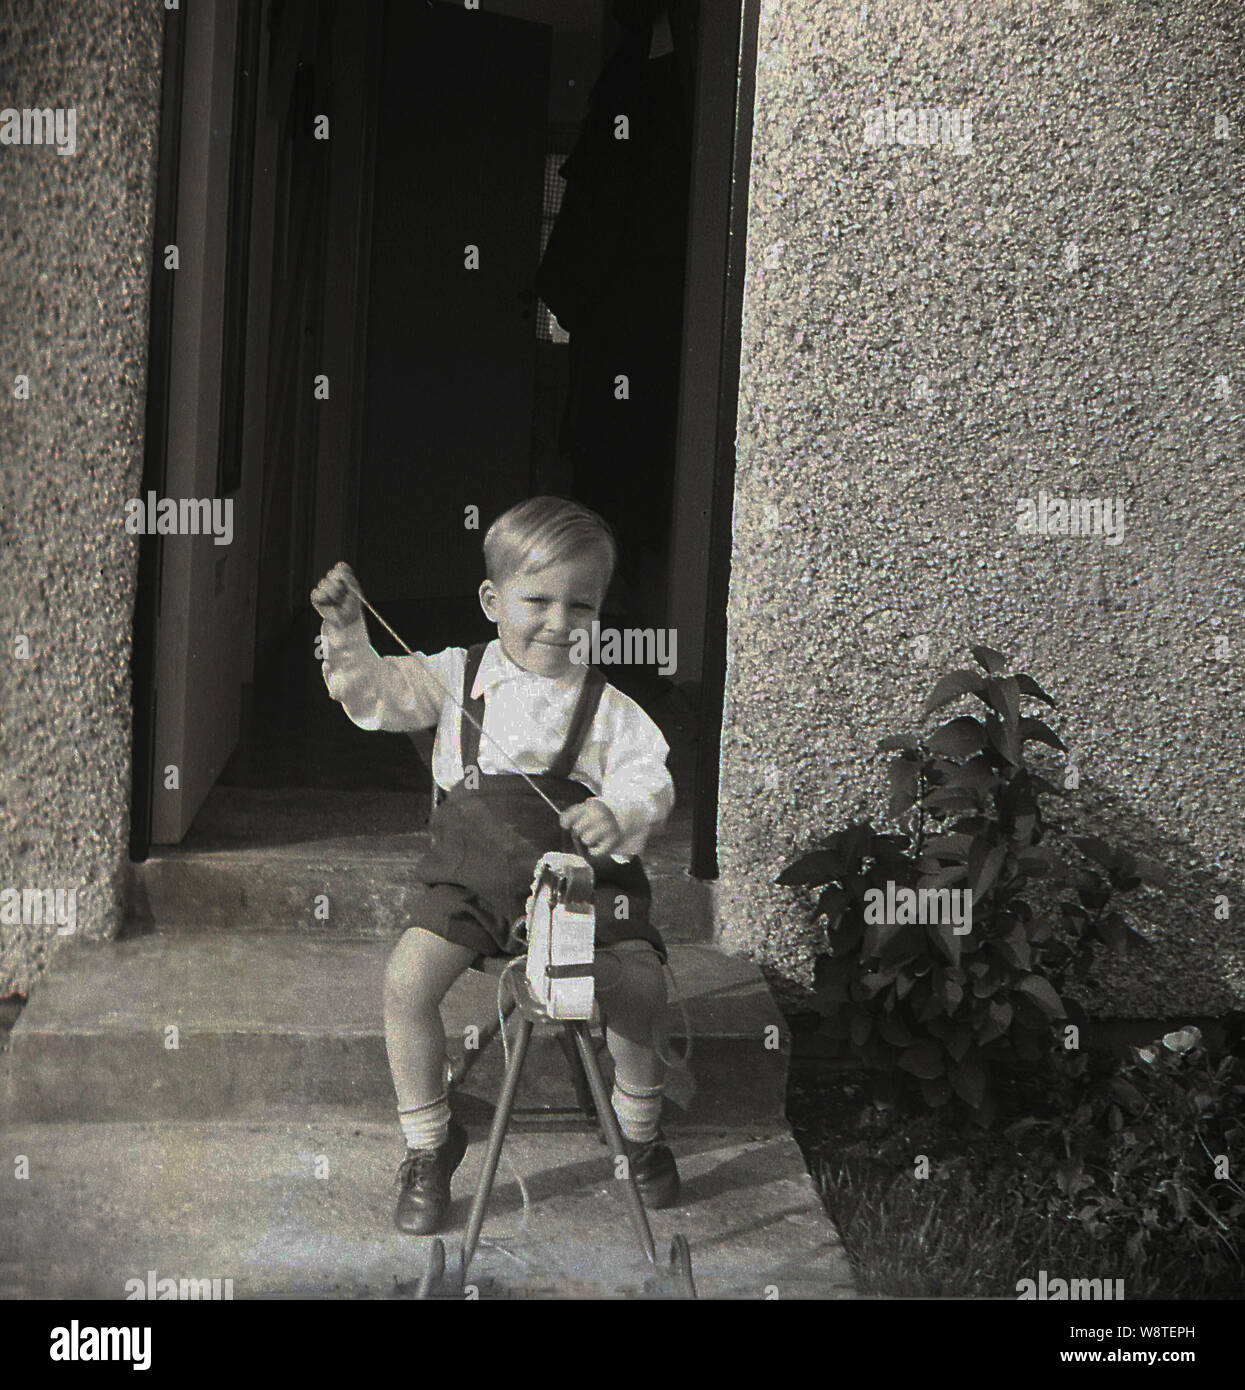 1950s, historical, a little boy outside a backdoor of pebble-dash house sitting on a ride-on toy horse with metal legs and wheels. Stock Photo